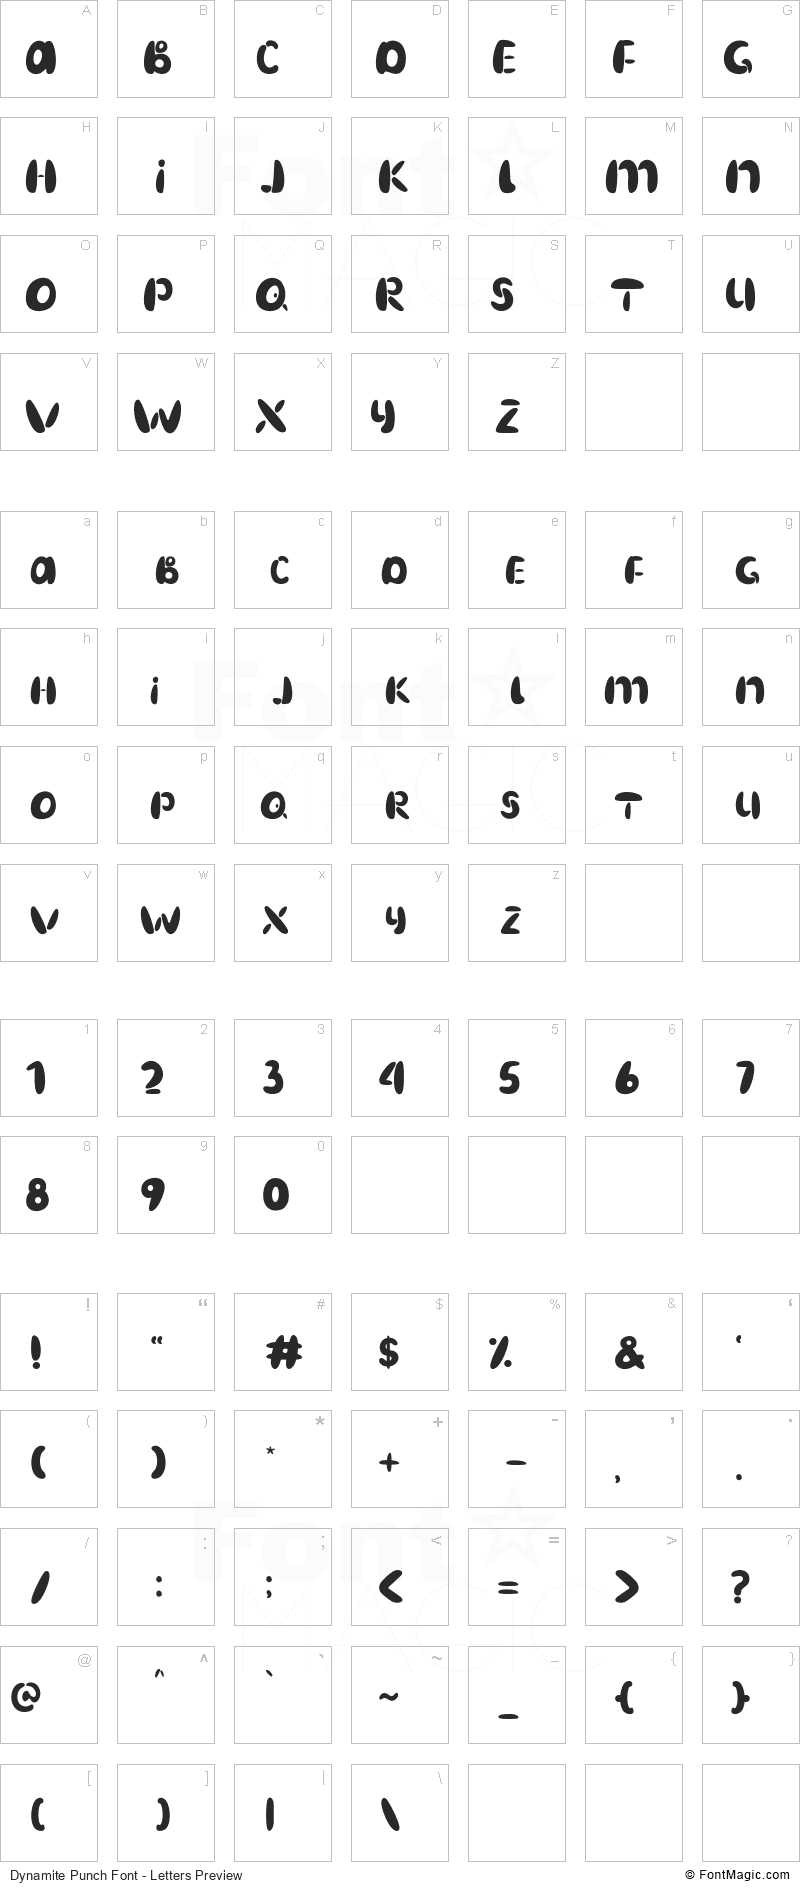 Dynamite Punch Font - All Latters Preview Chart